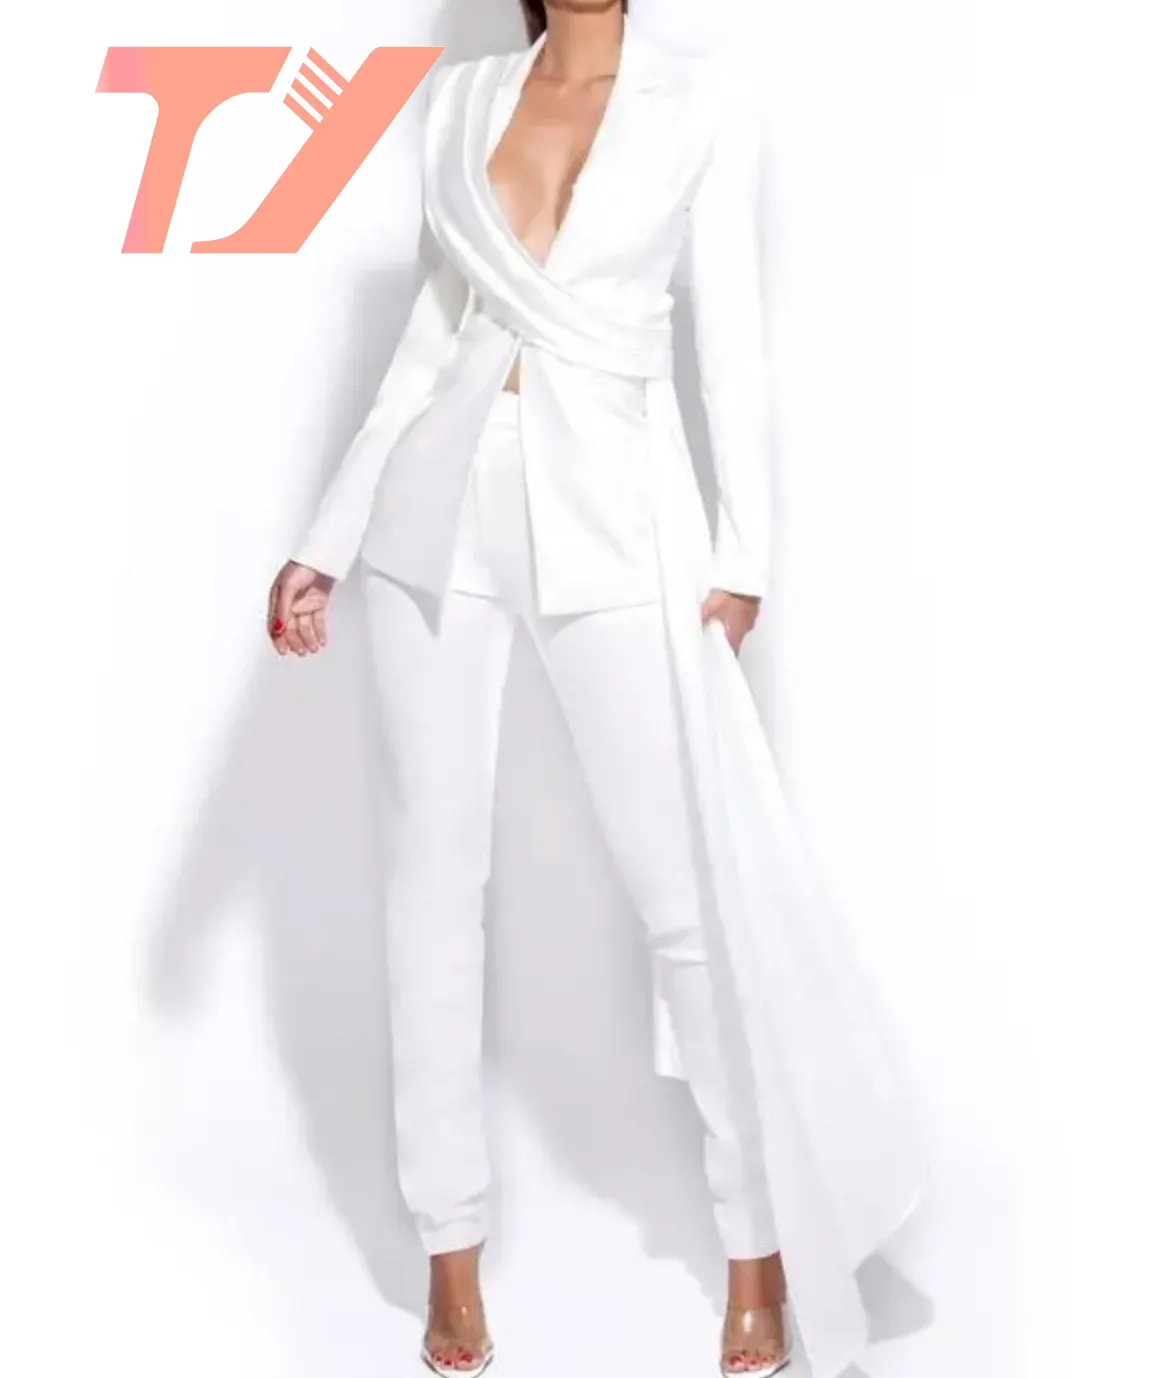 TUOYI Ladies White Skinny Fit Crepe Coat Tuxedo Pant Suits White Office Formal Business Suits Mujeres